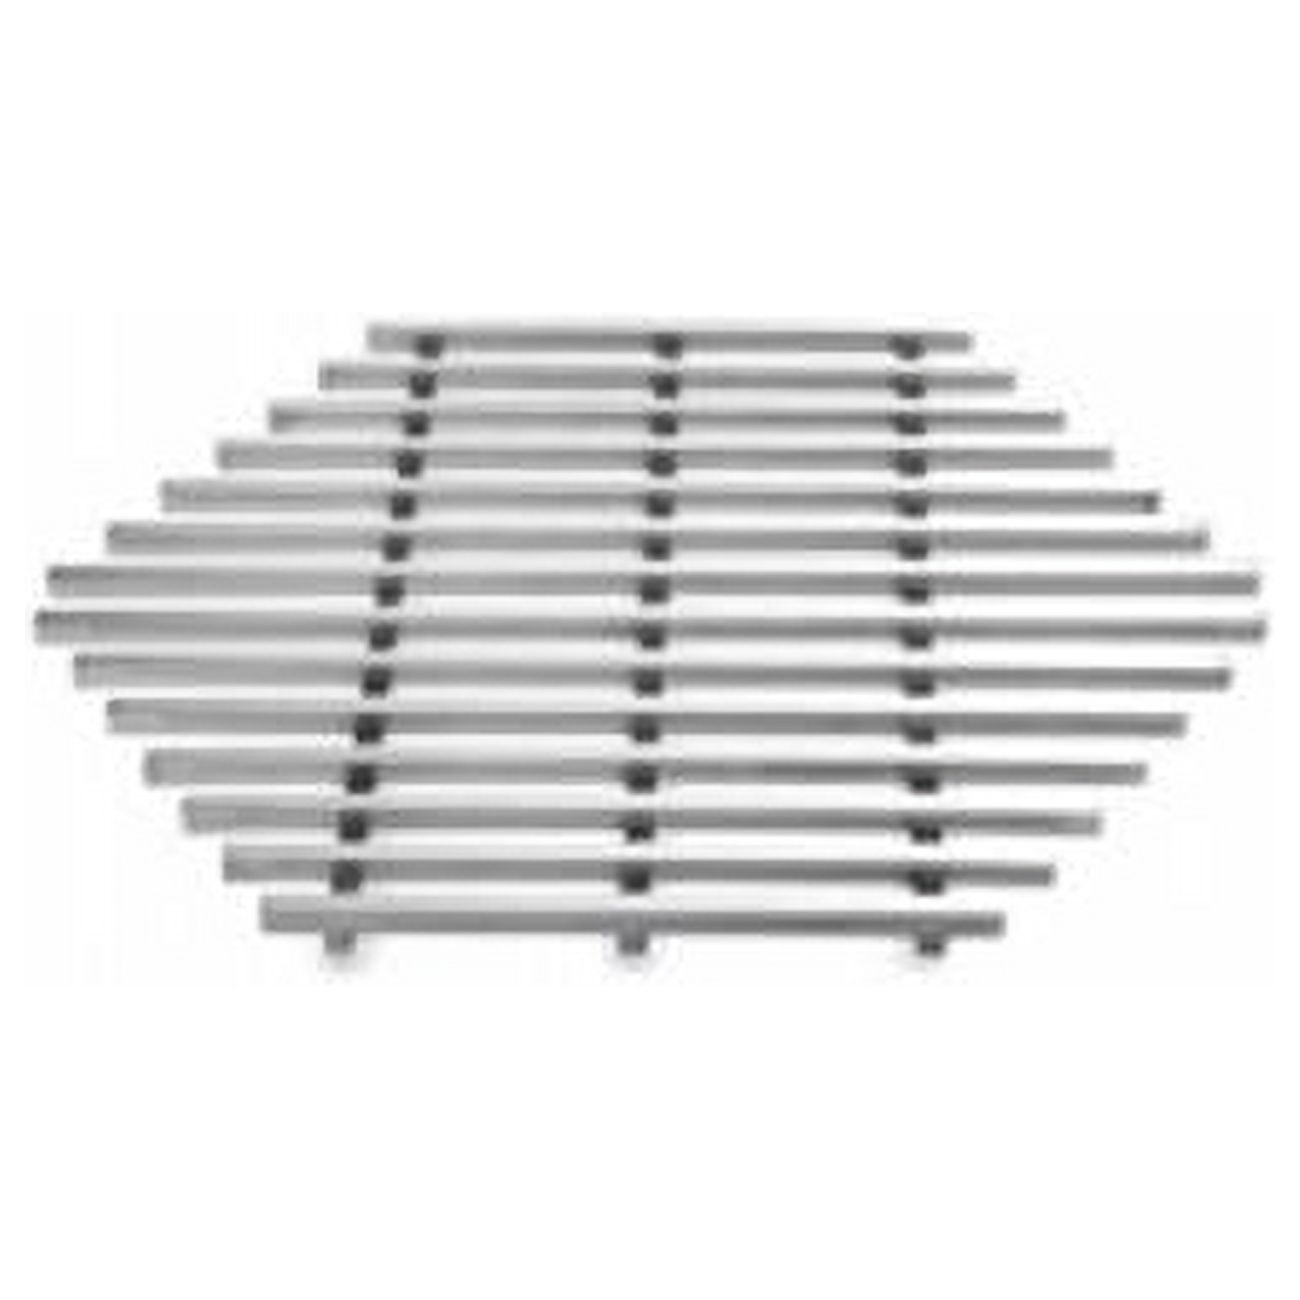 Rosseto Serving Solutions SM224 Medium Honeycomb Track Grill- Stainless Steel - image 1 of 1